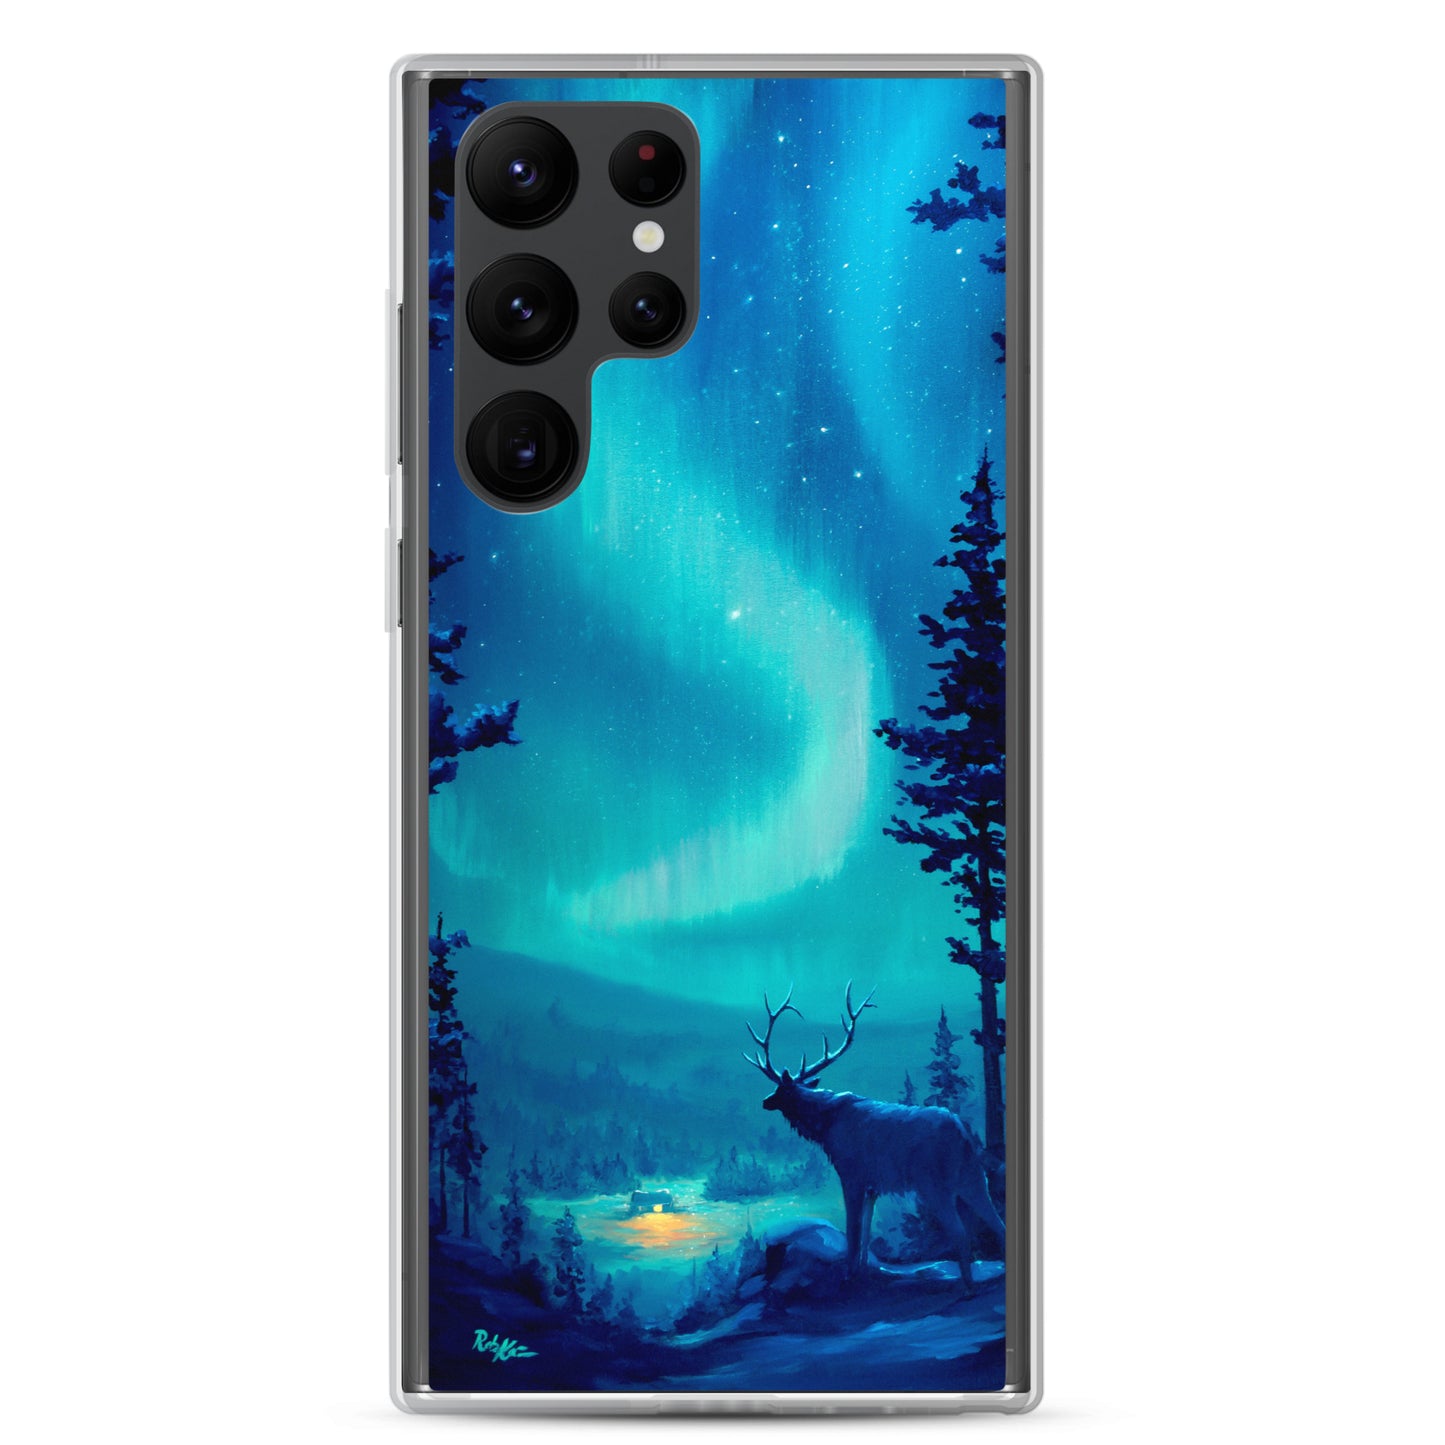 Samsung Case featuring Northern Light by Rob Kaz